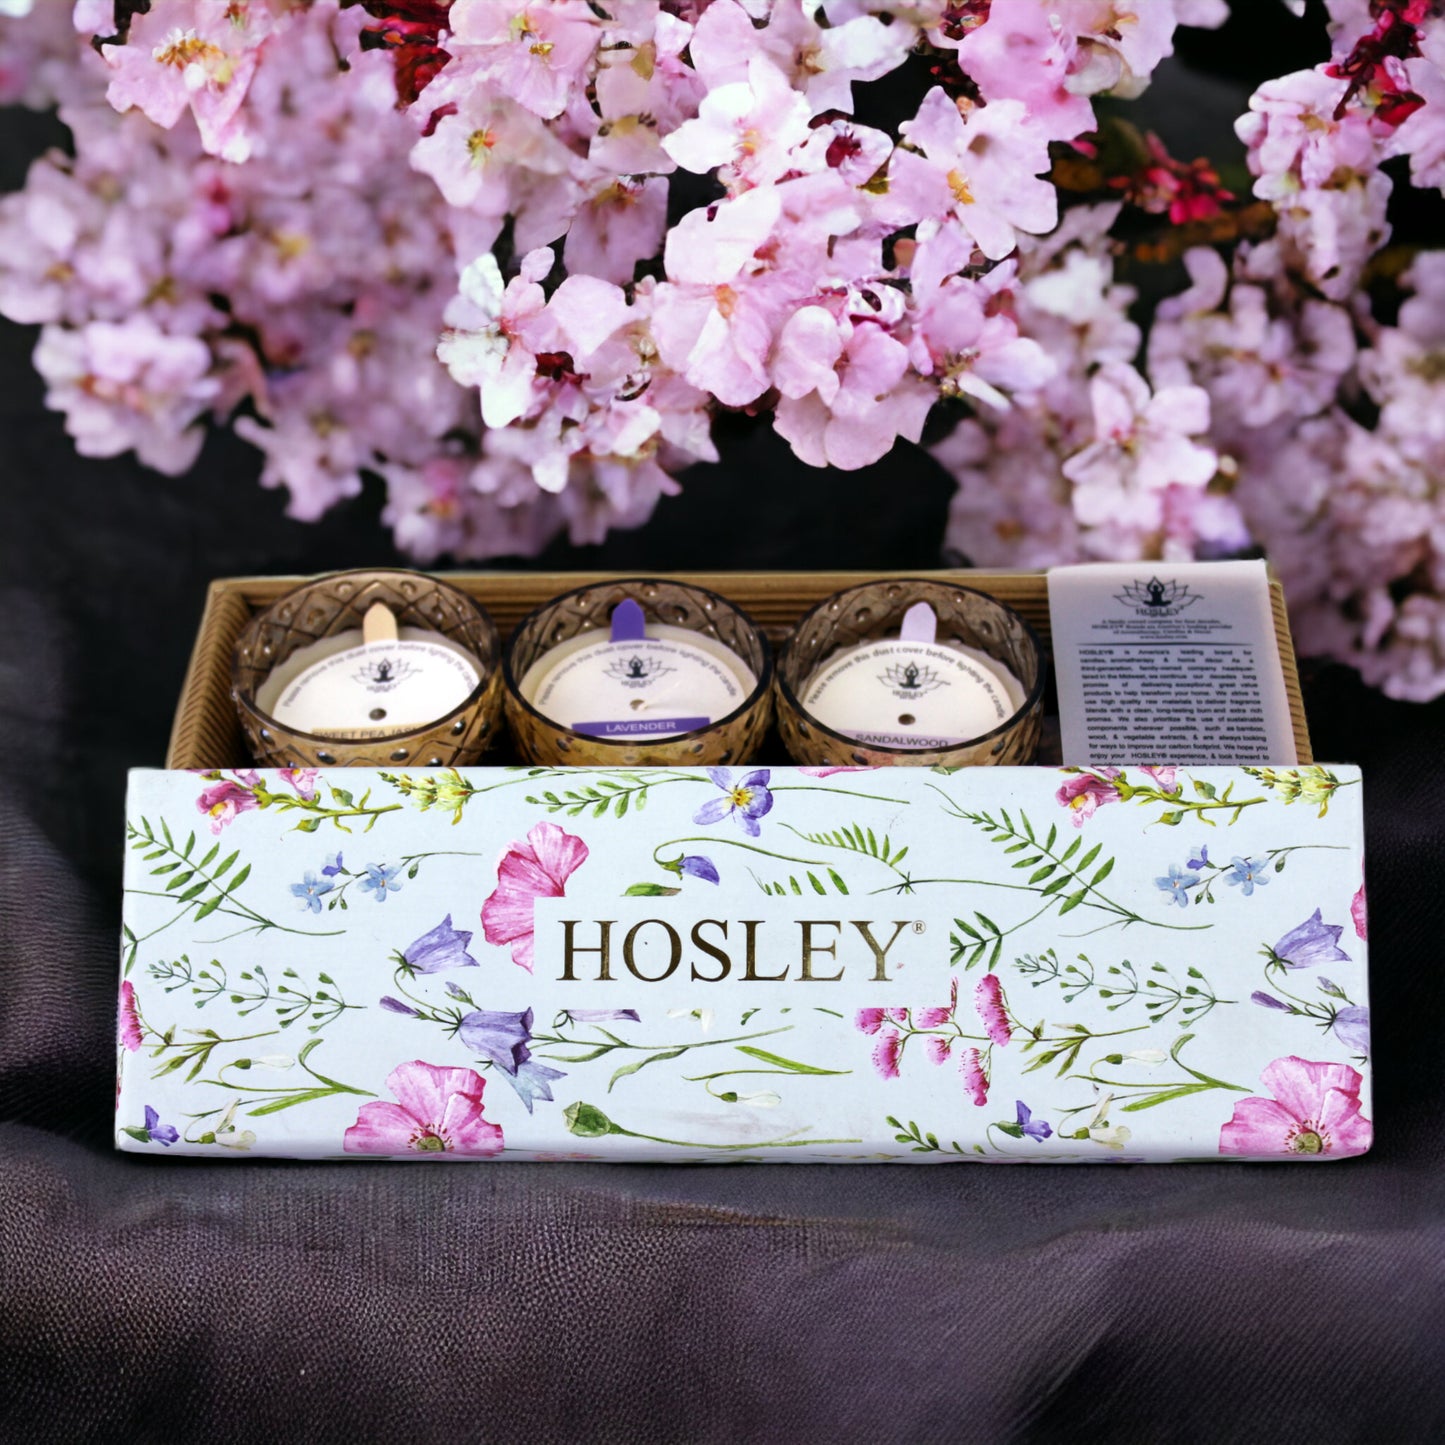 Hosley® 4 In 1 Gift Box - Scented Gold Glass Candles with Ceramic Incense Stick Holder, Rose Petals and Dragon Blood Incense Sticks